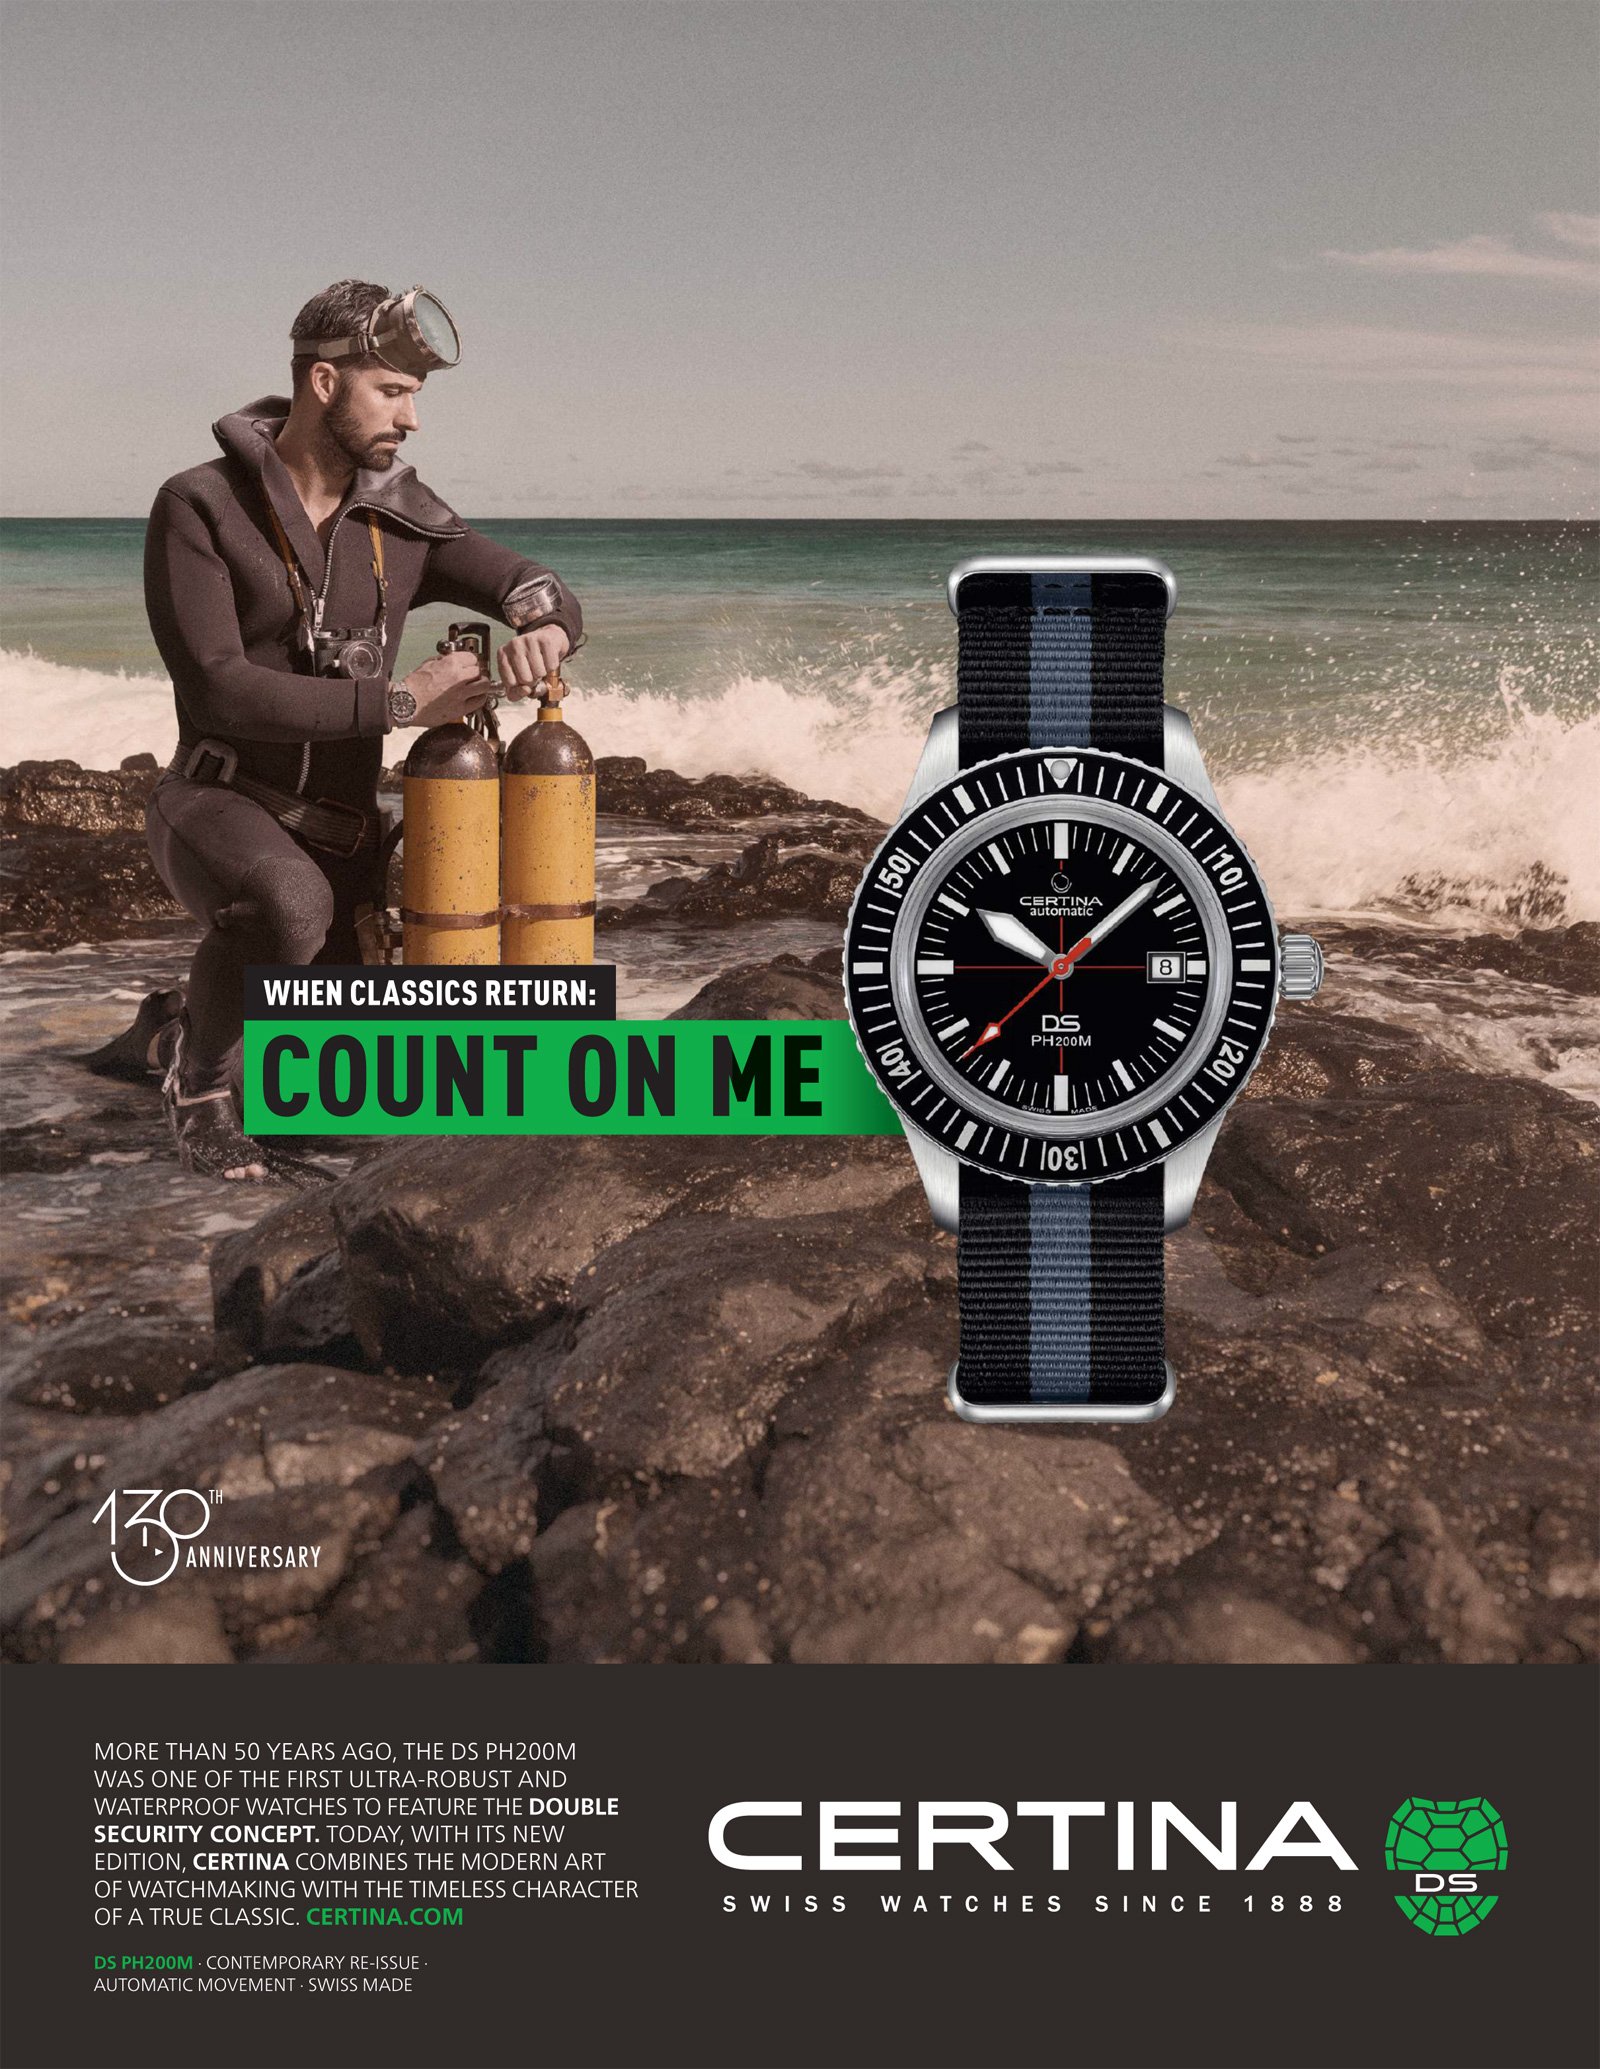 Certina, 60 Years of Double Security